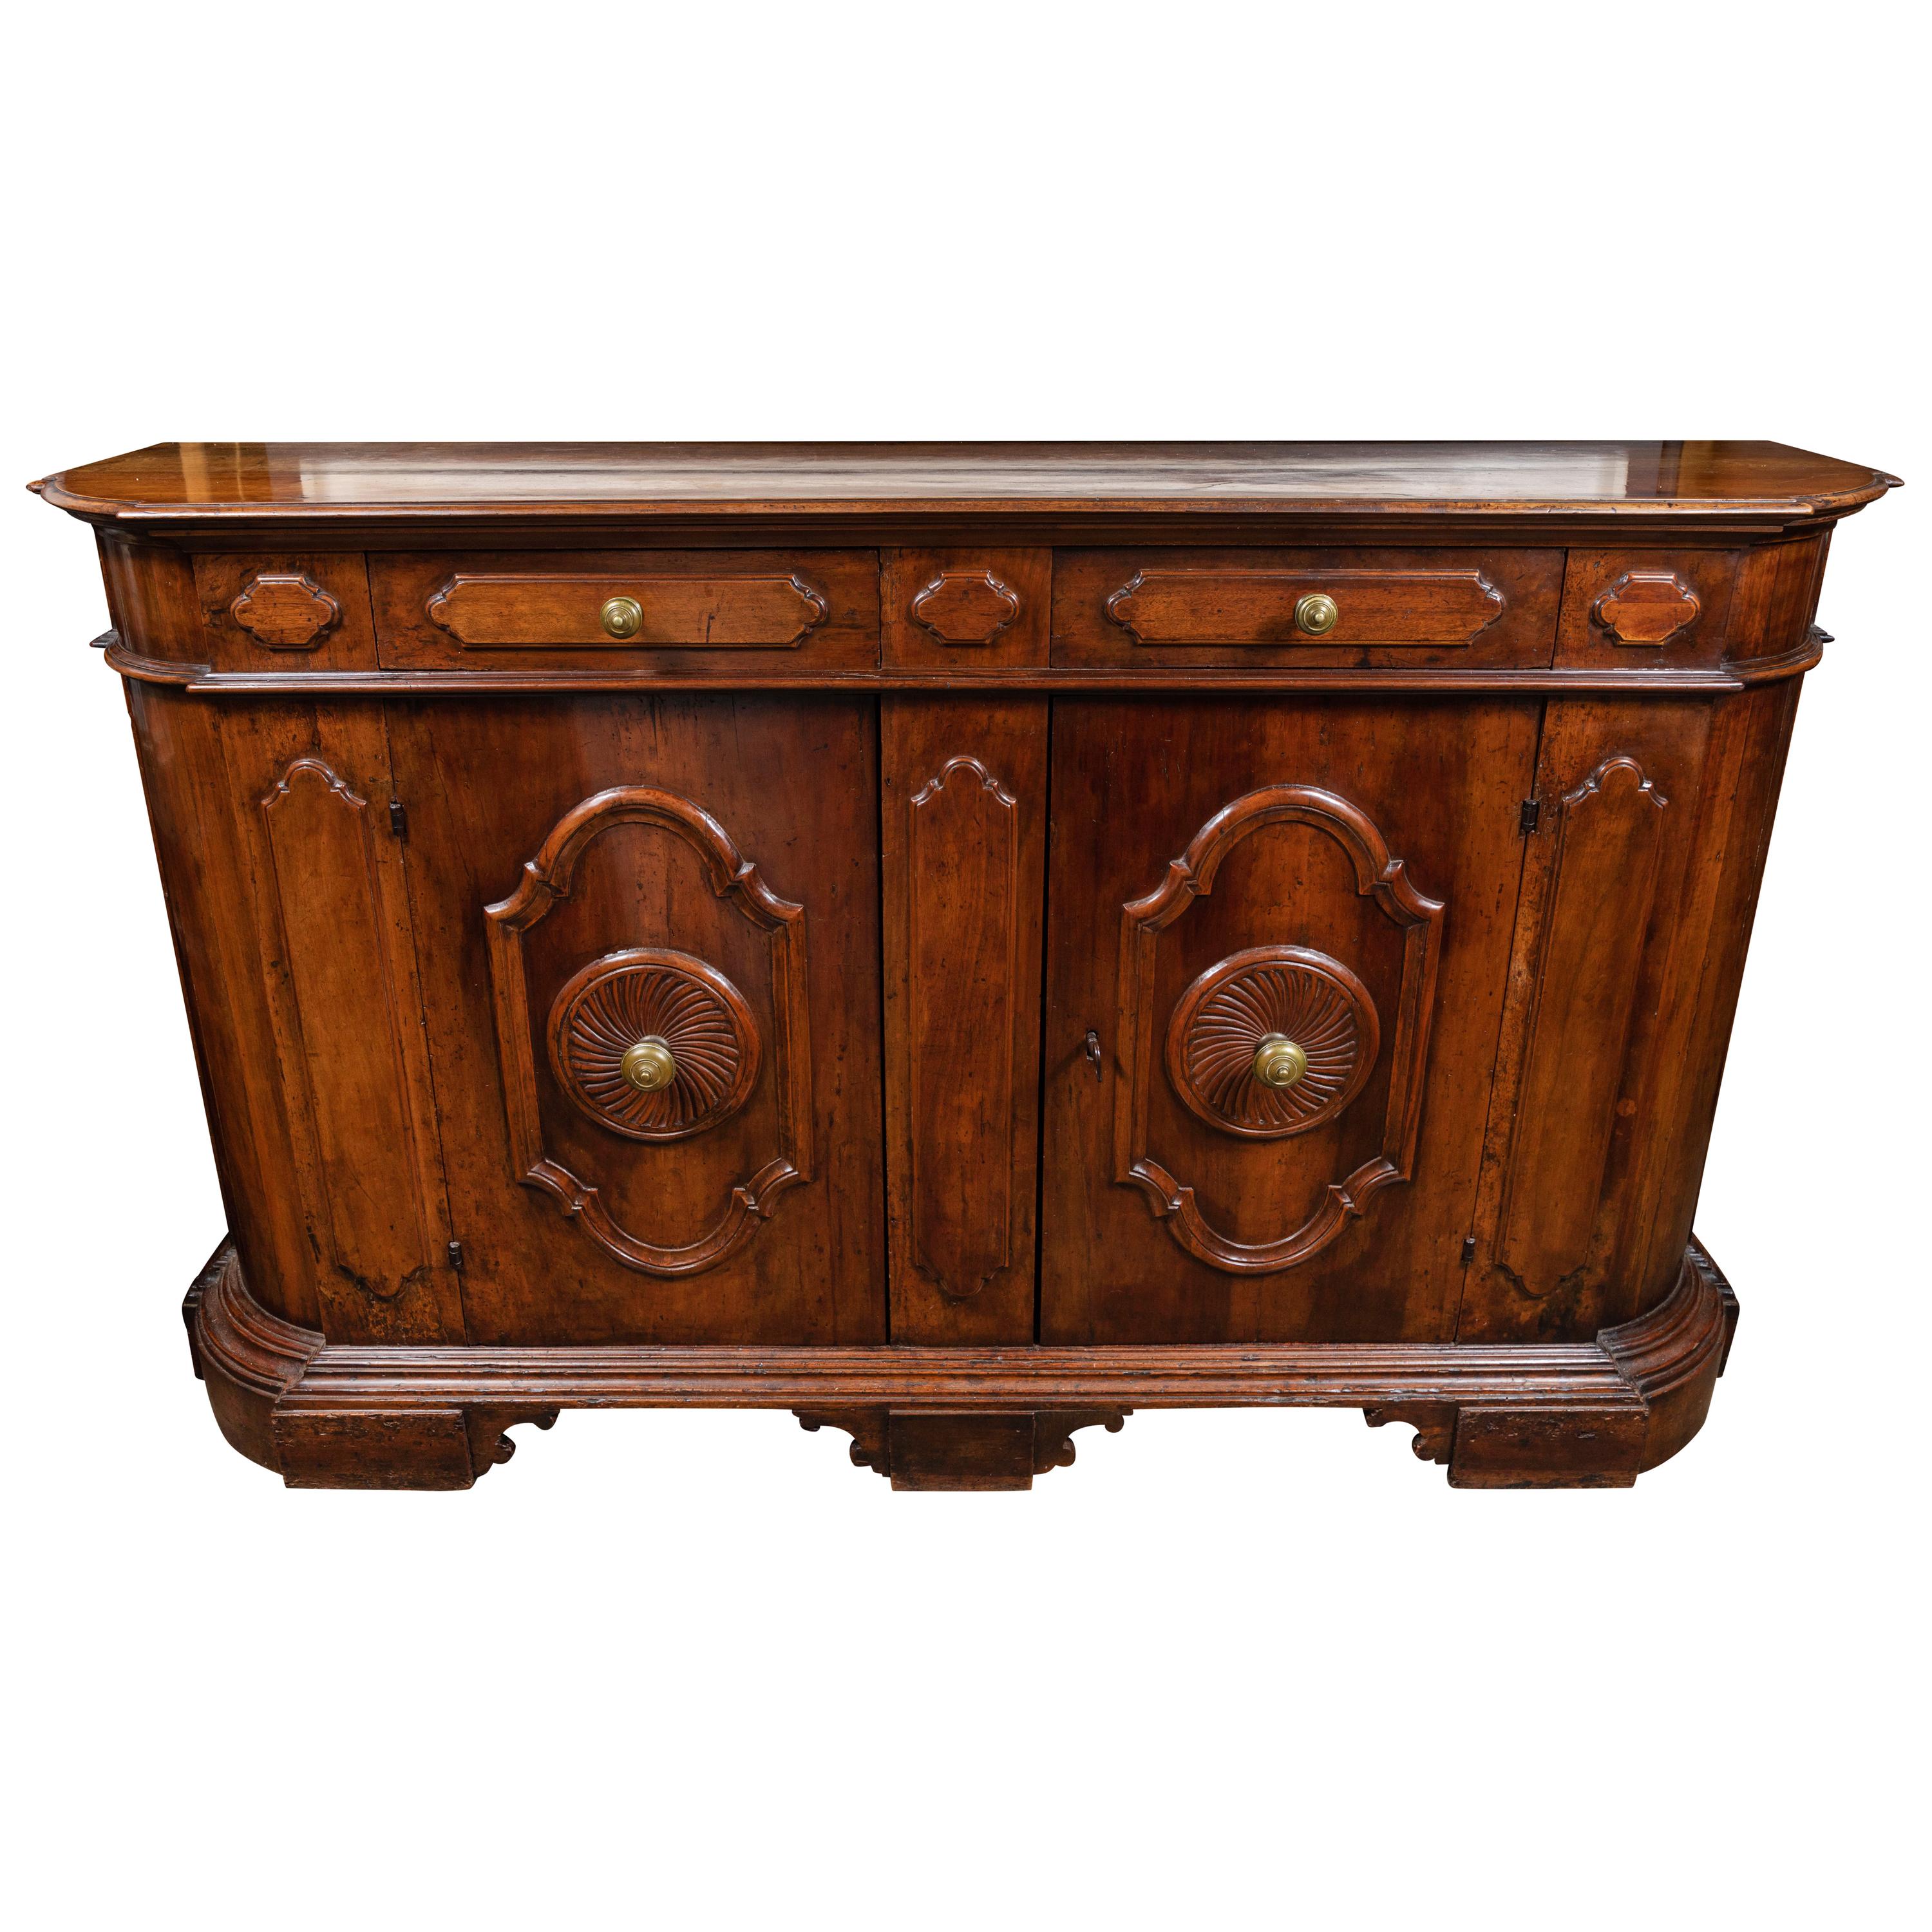 19th Century, Solid Walnut, Paneled, Tuscan Buffet For Sale